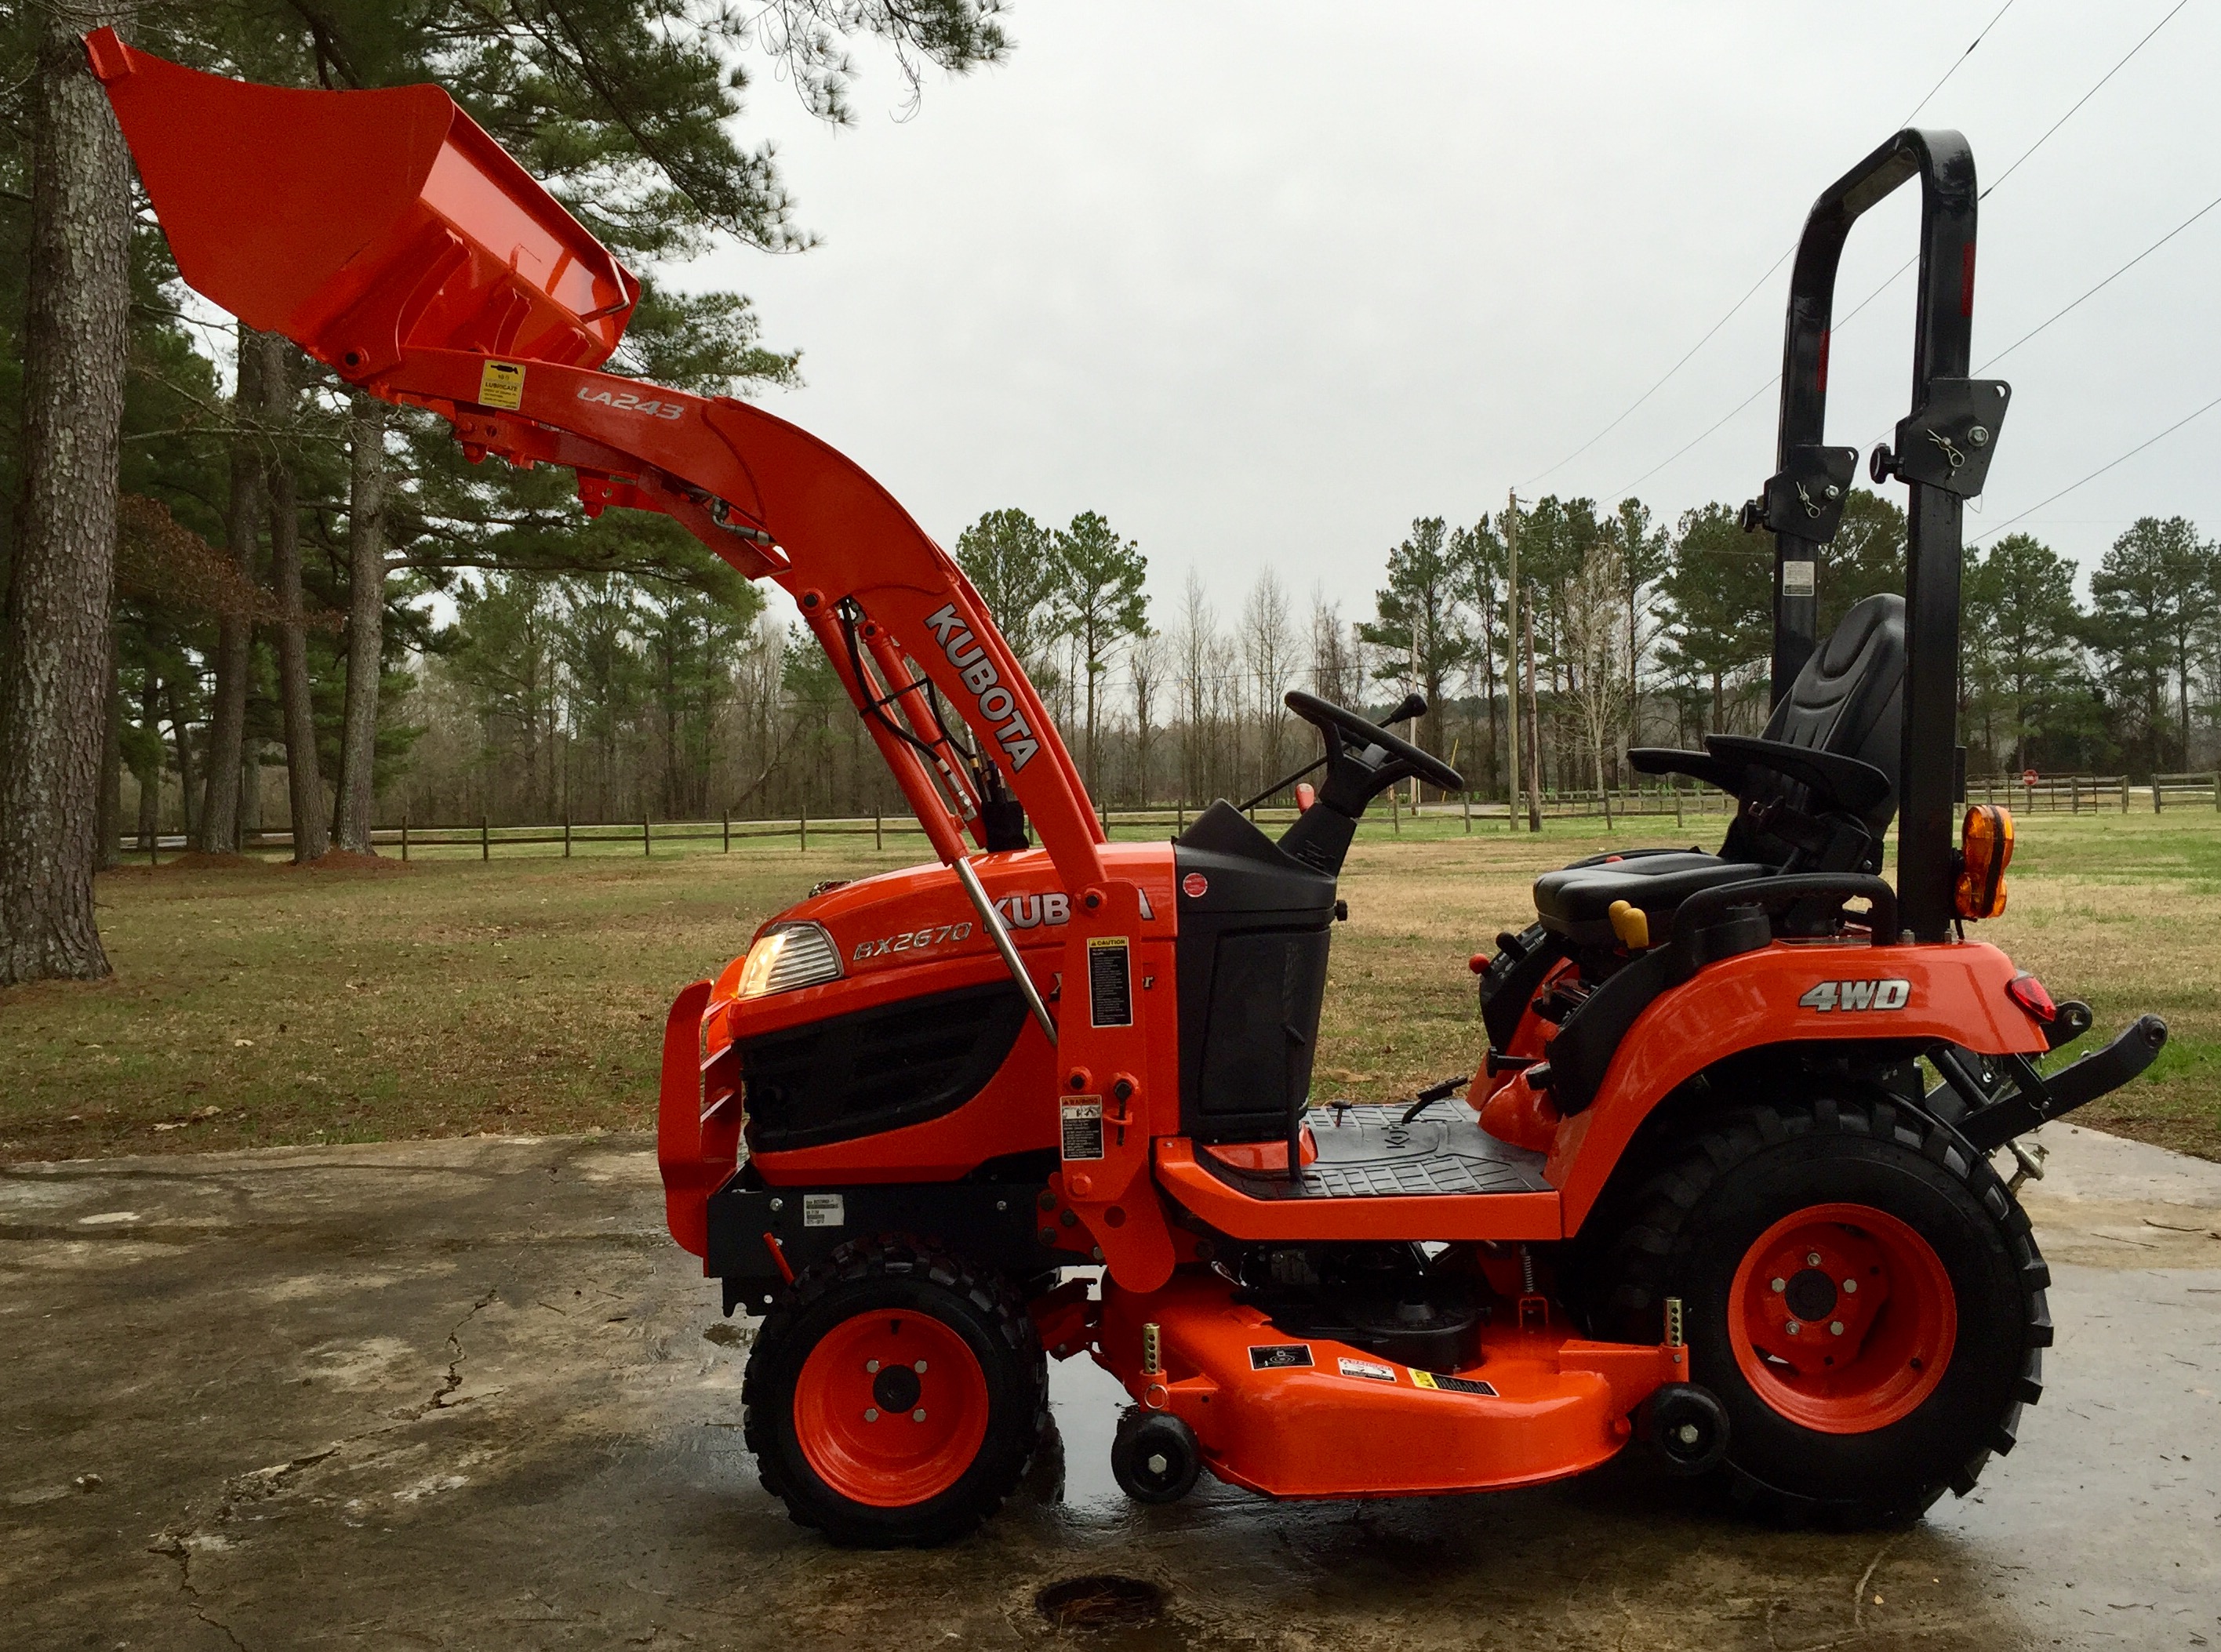 Kubota BX2670-1 Diesel Tractor in the Baltimore and Surrounding Areas